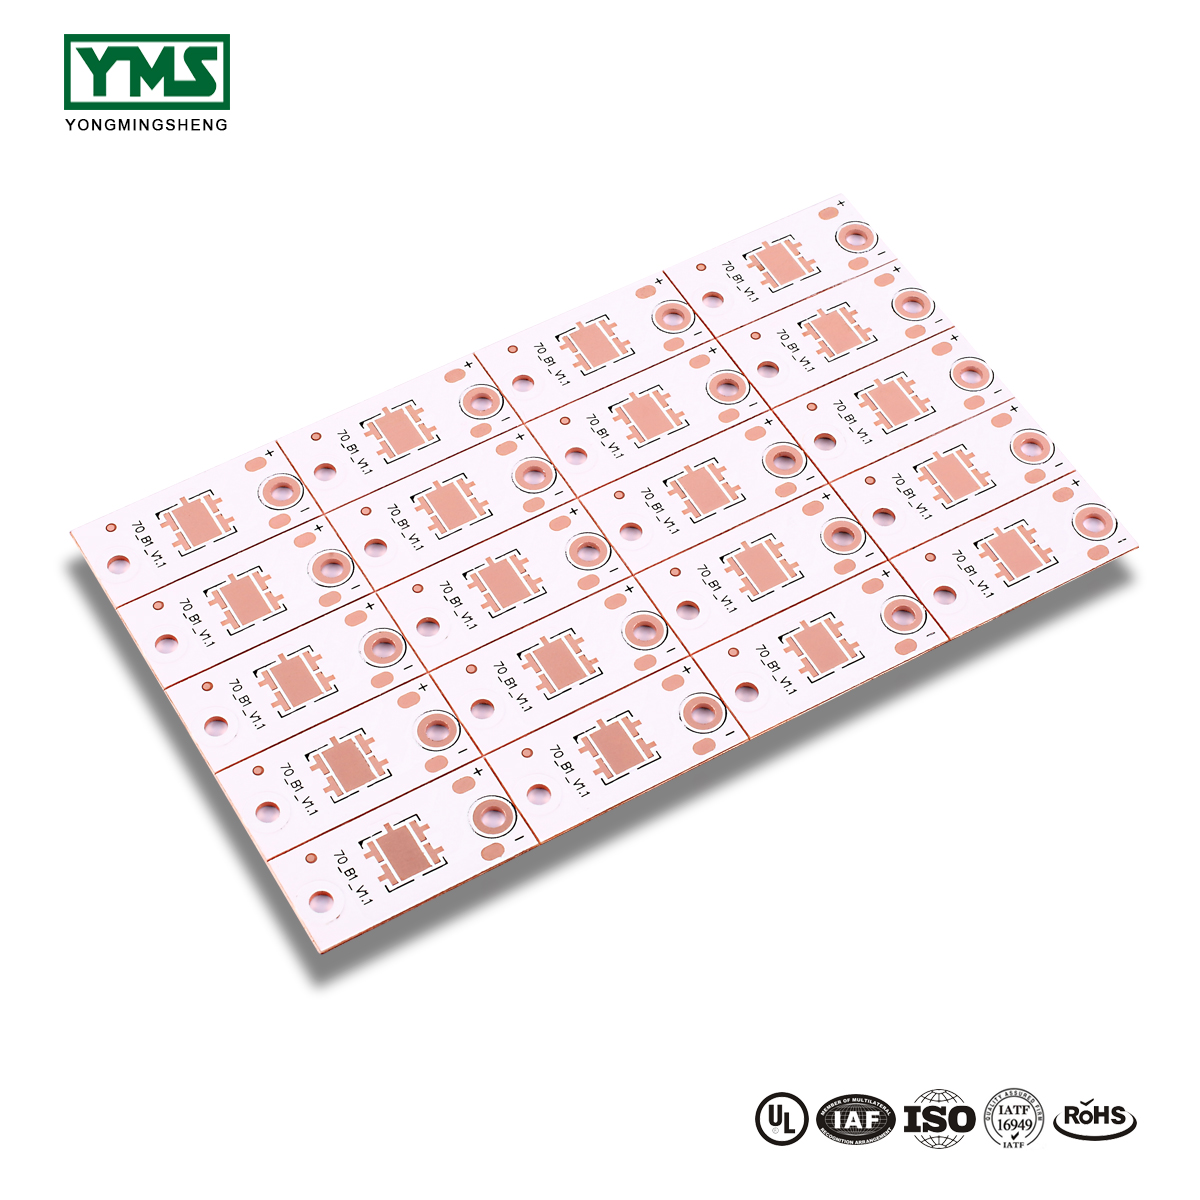 Ordinary Discount Printed Circuit Board Fabricate - 1Layer Thermoelectric Copper base Board | YMSPCB – Yongmingsheng